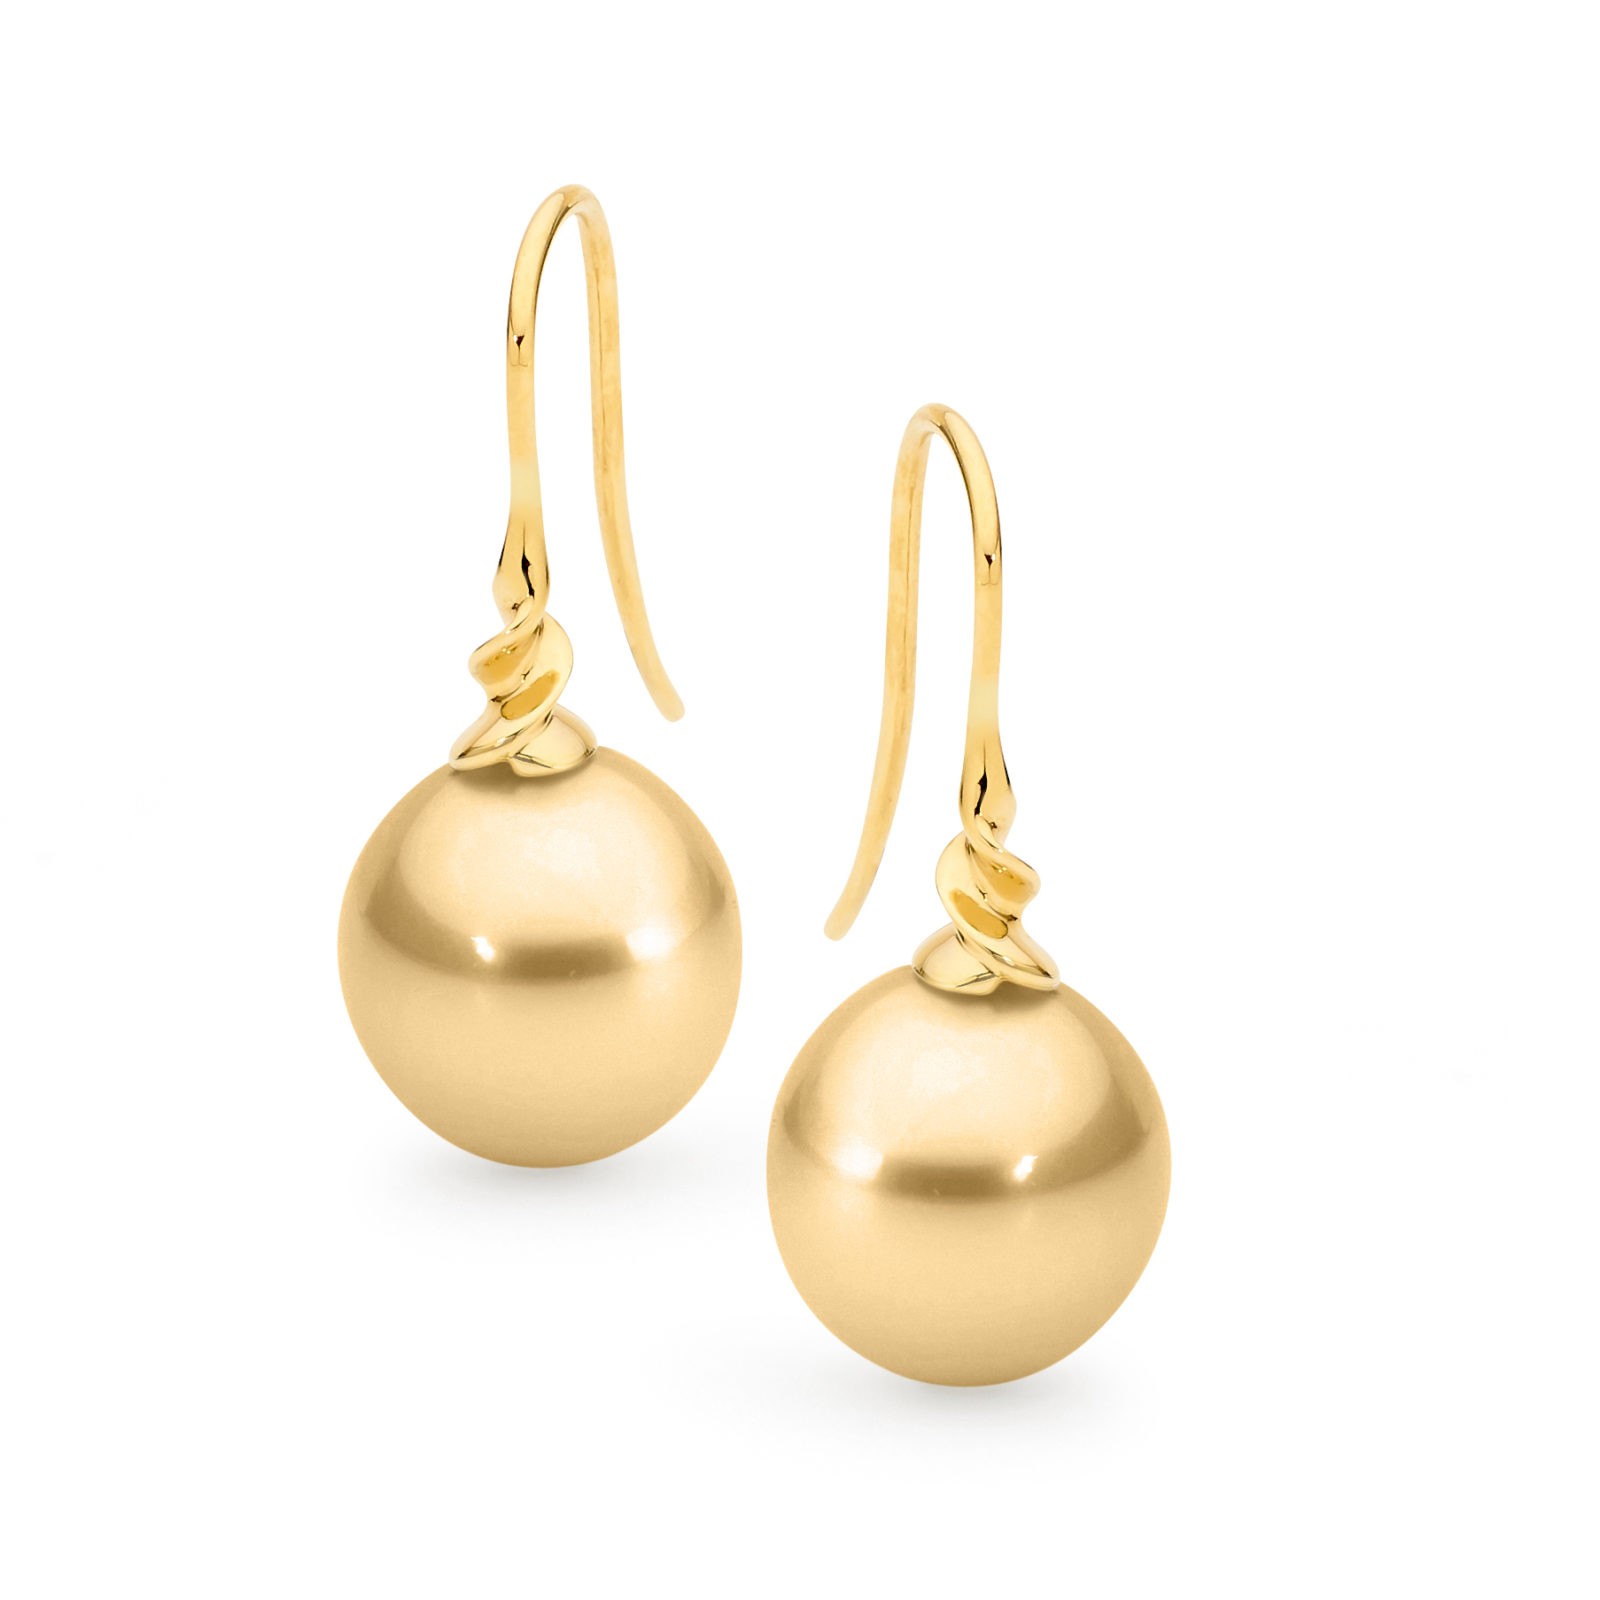 Twisted French Hook Pearl Earrings - Allure South Sea Pearls